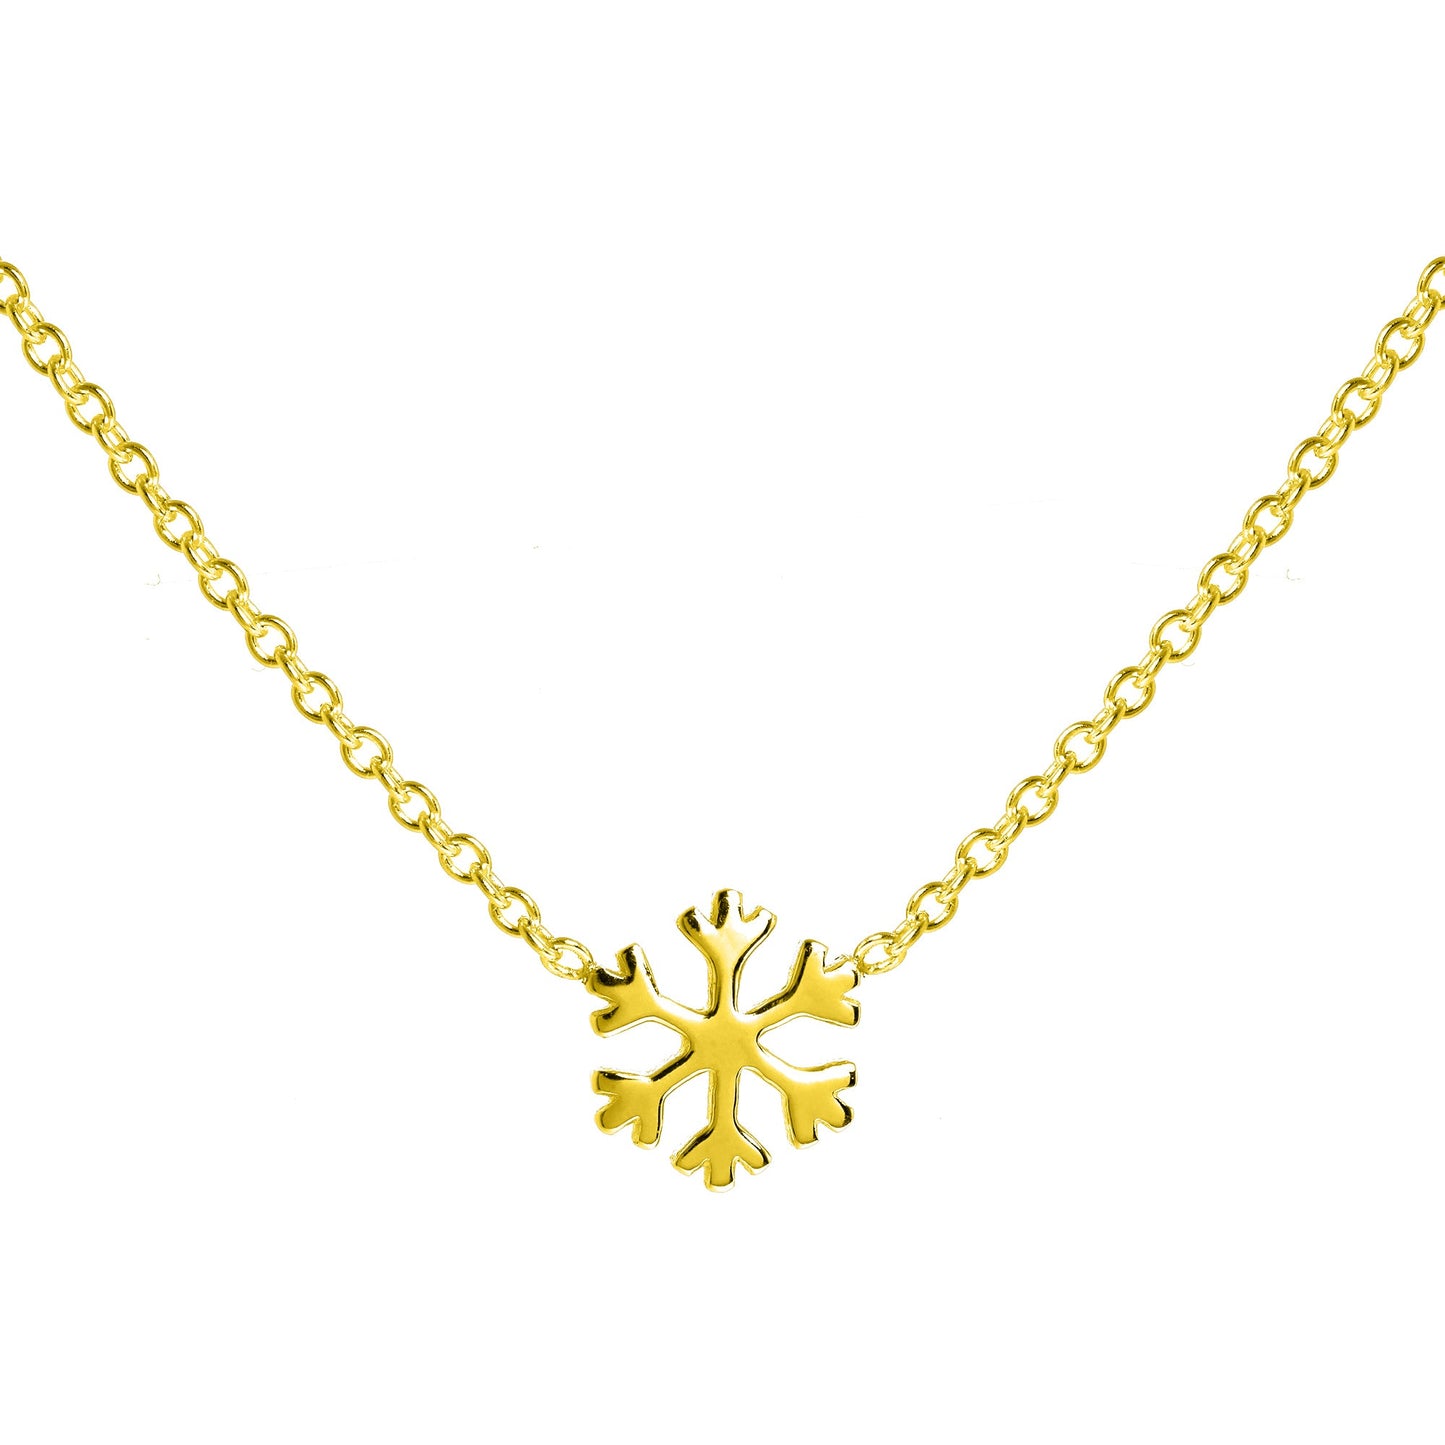 Gold Plated Sterling Silver Snowflake Necklace - 18 Inch